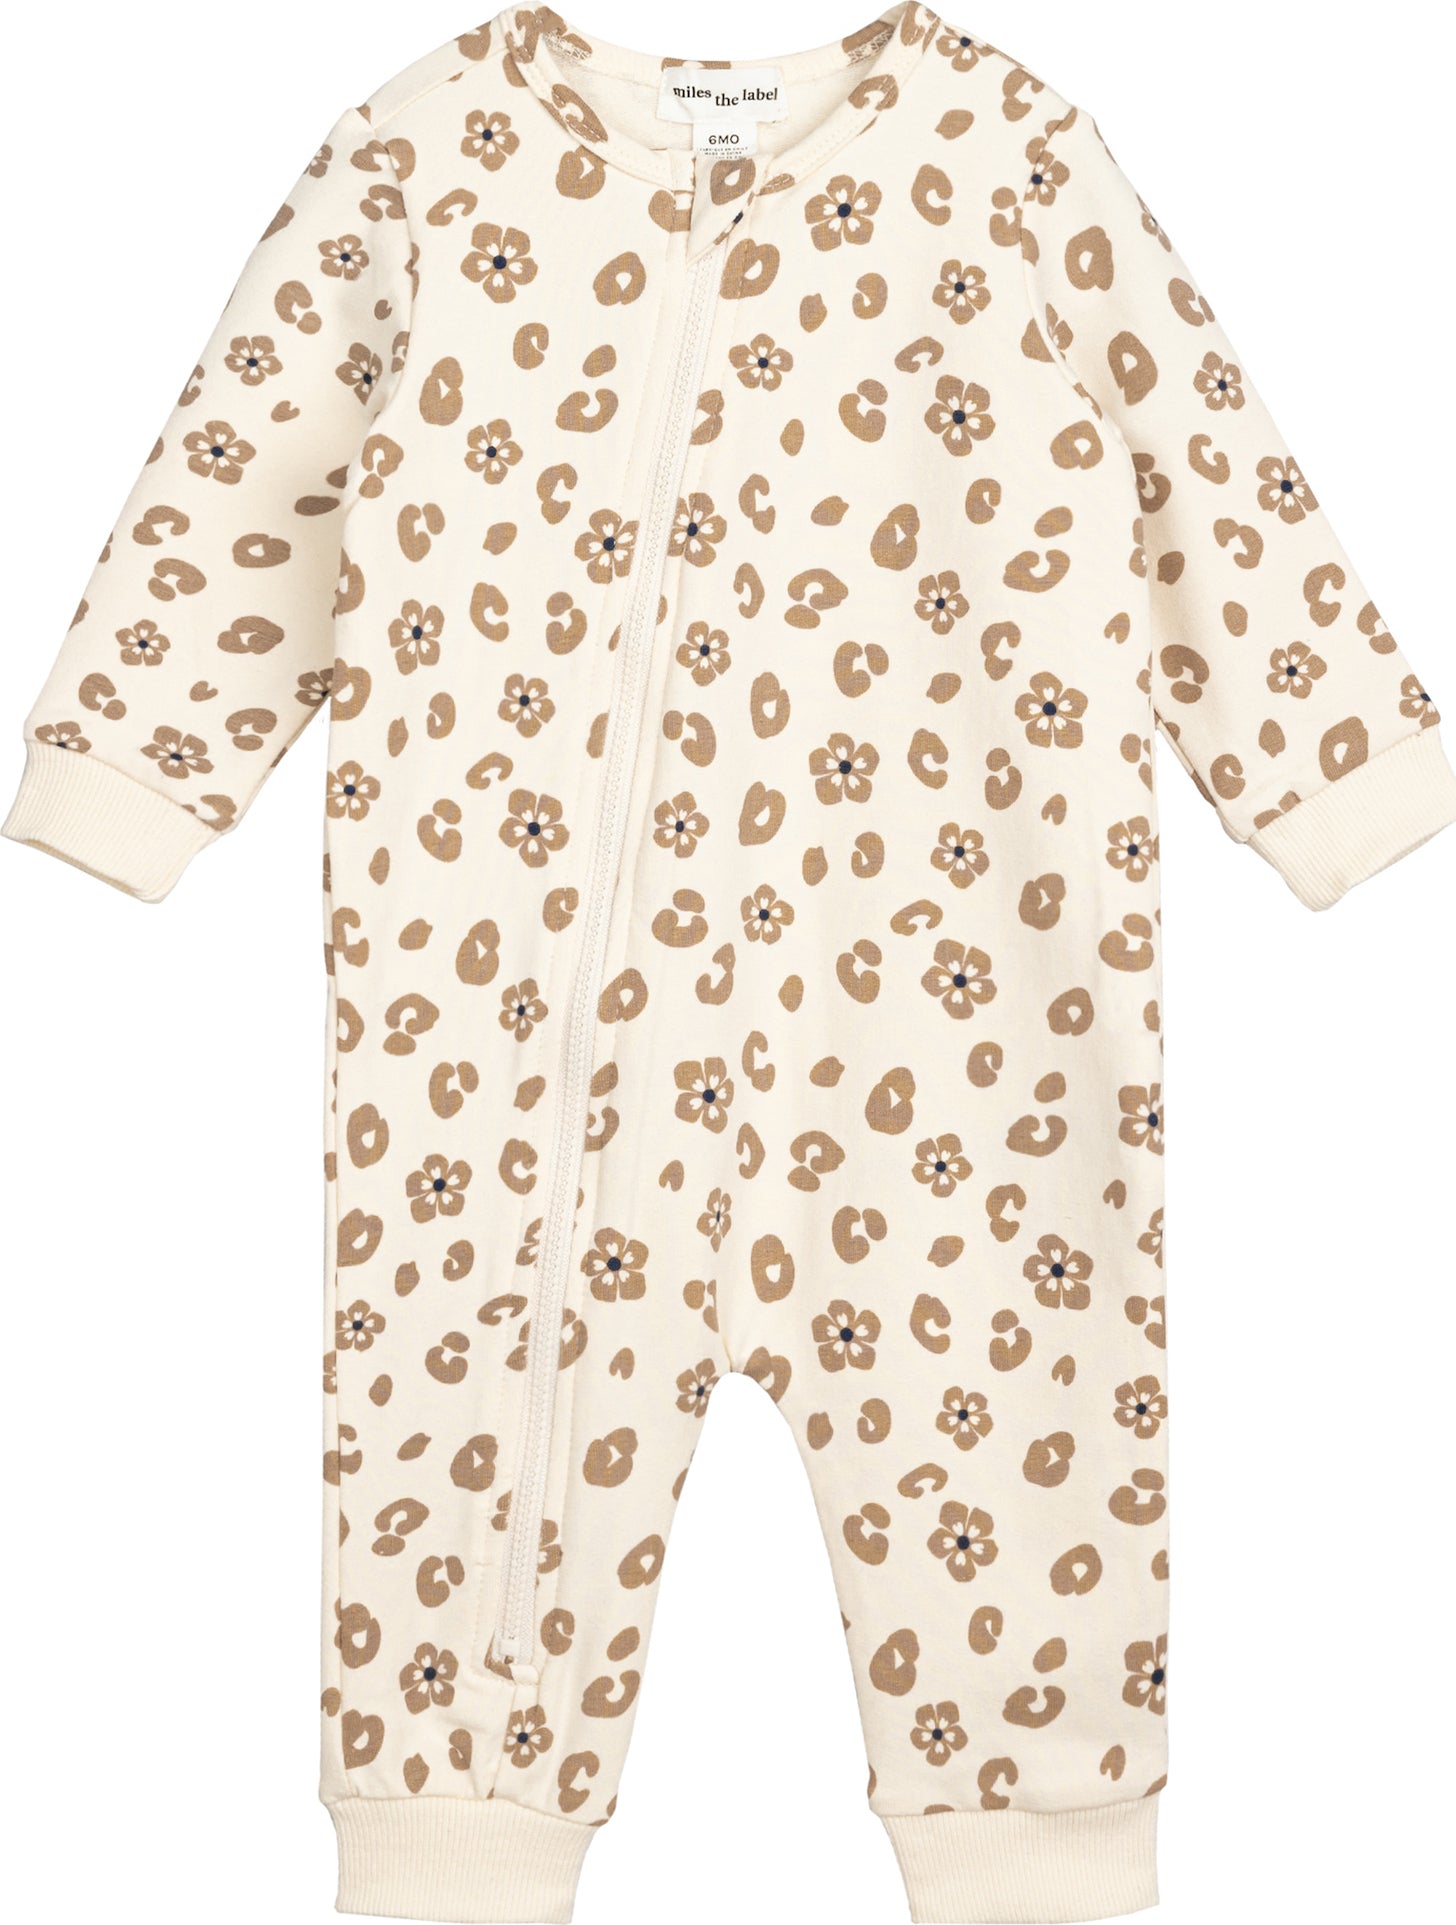 Miles The Label Snow Sprinkle Print Playsuit - Baby Girl | Altitude Sports